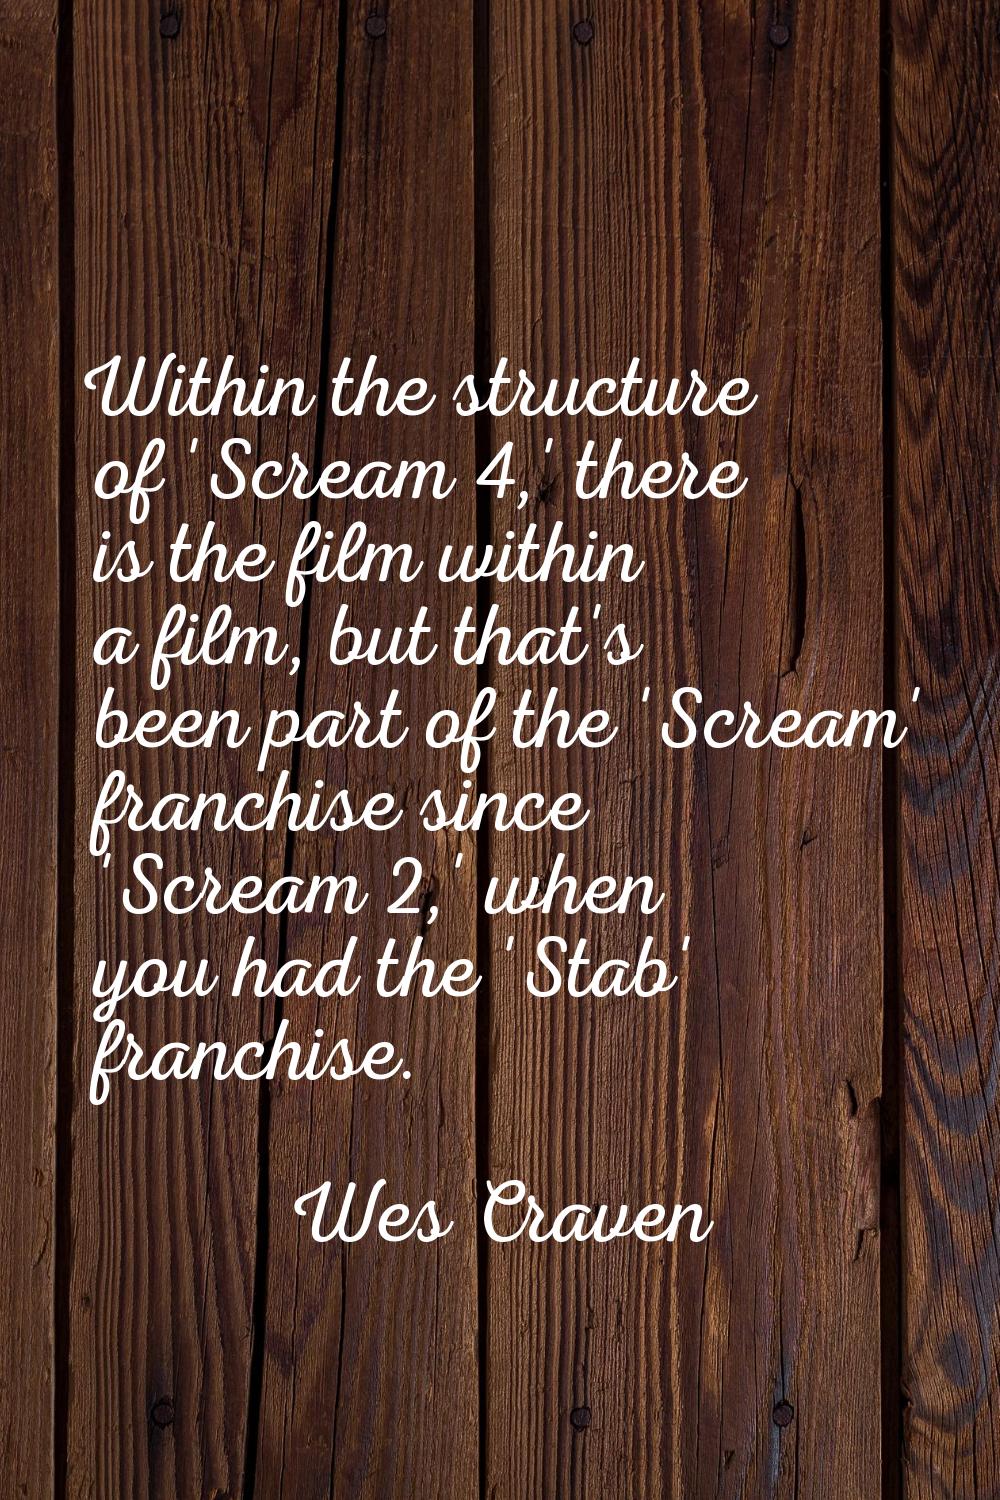 Within the structure of 'Scream 4,' there is the film within a film, but that's been part of the 'S